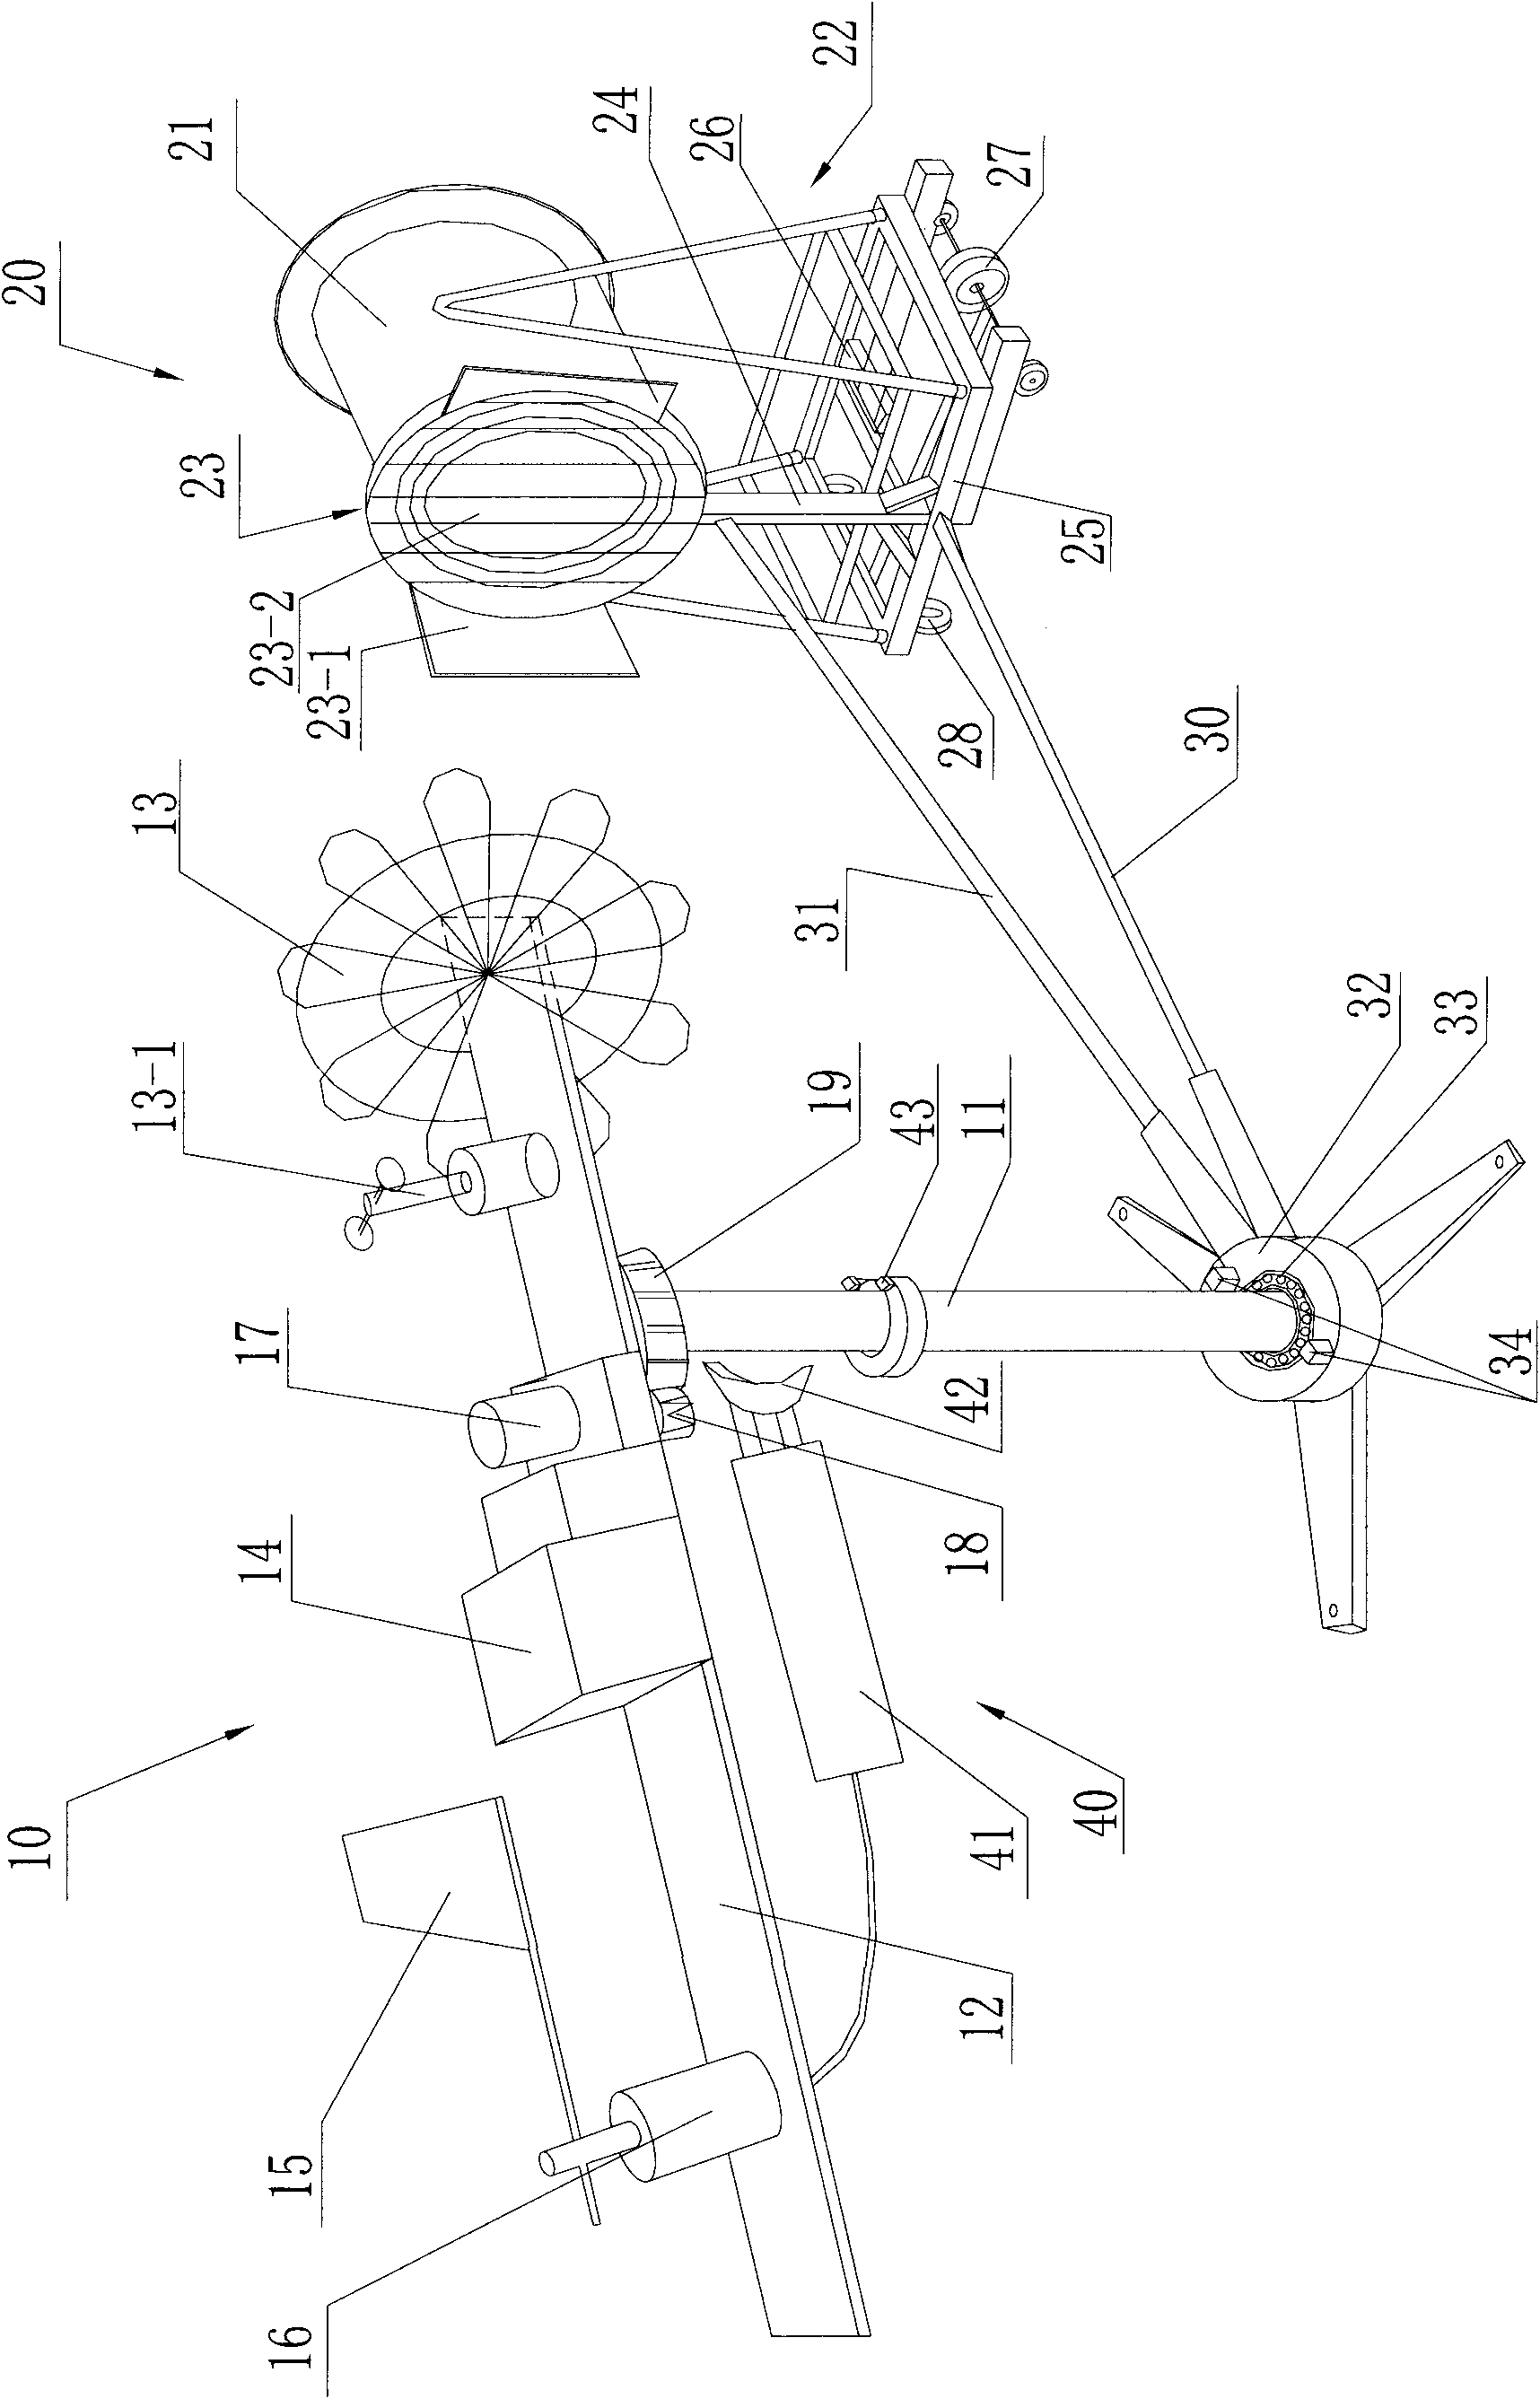 Wind direction tracking wind power generation simulating device